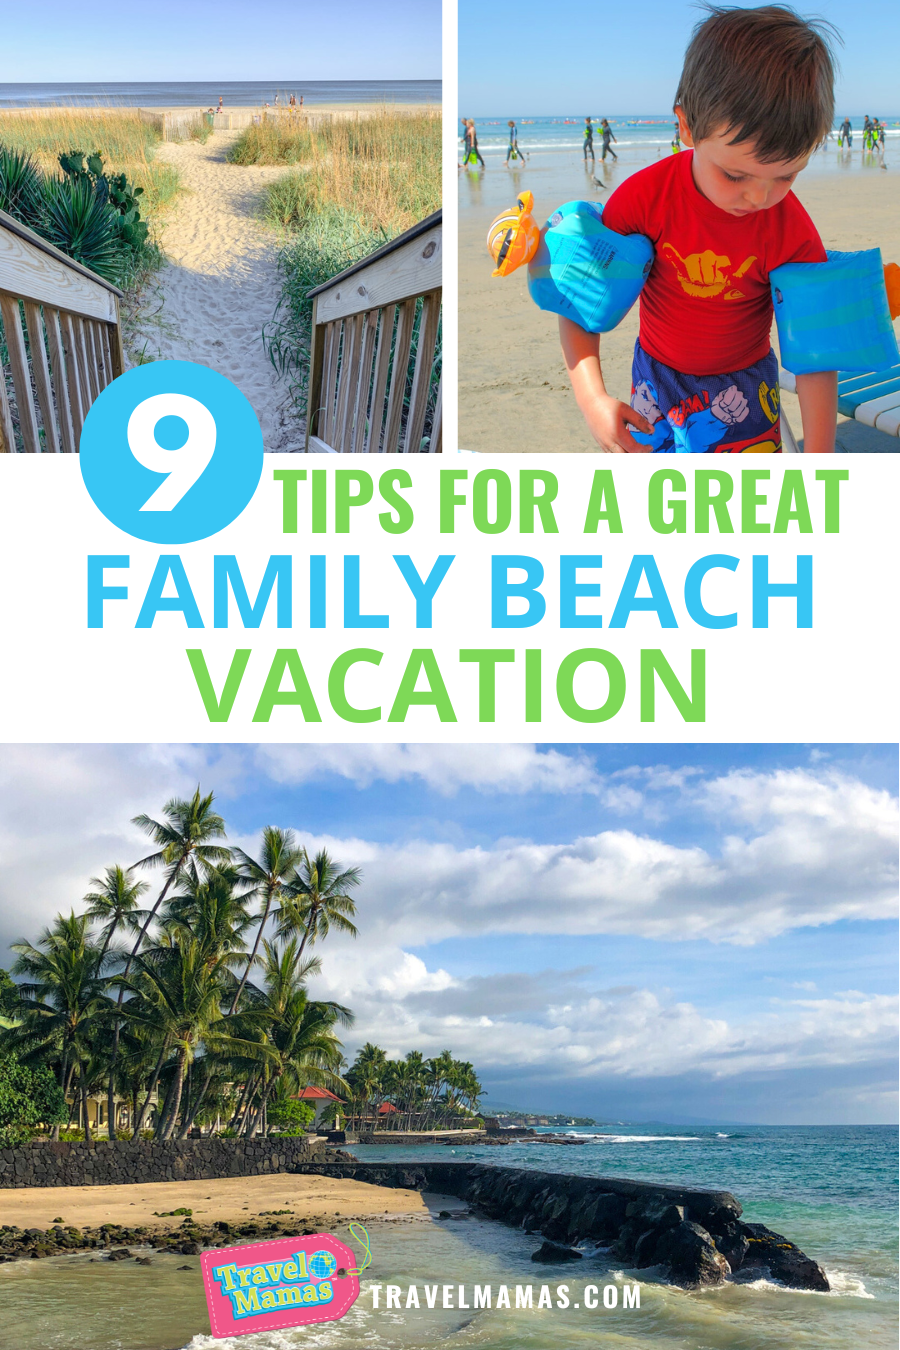 9 Tips for a Great Family Beach Vacation